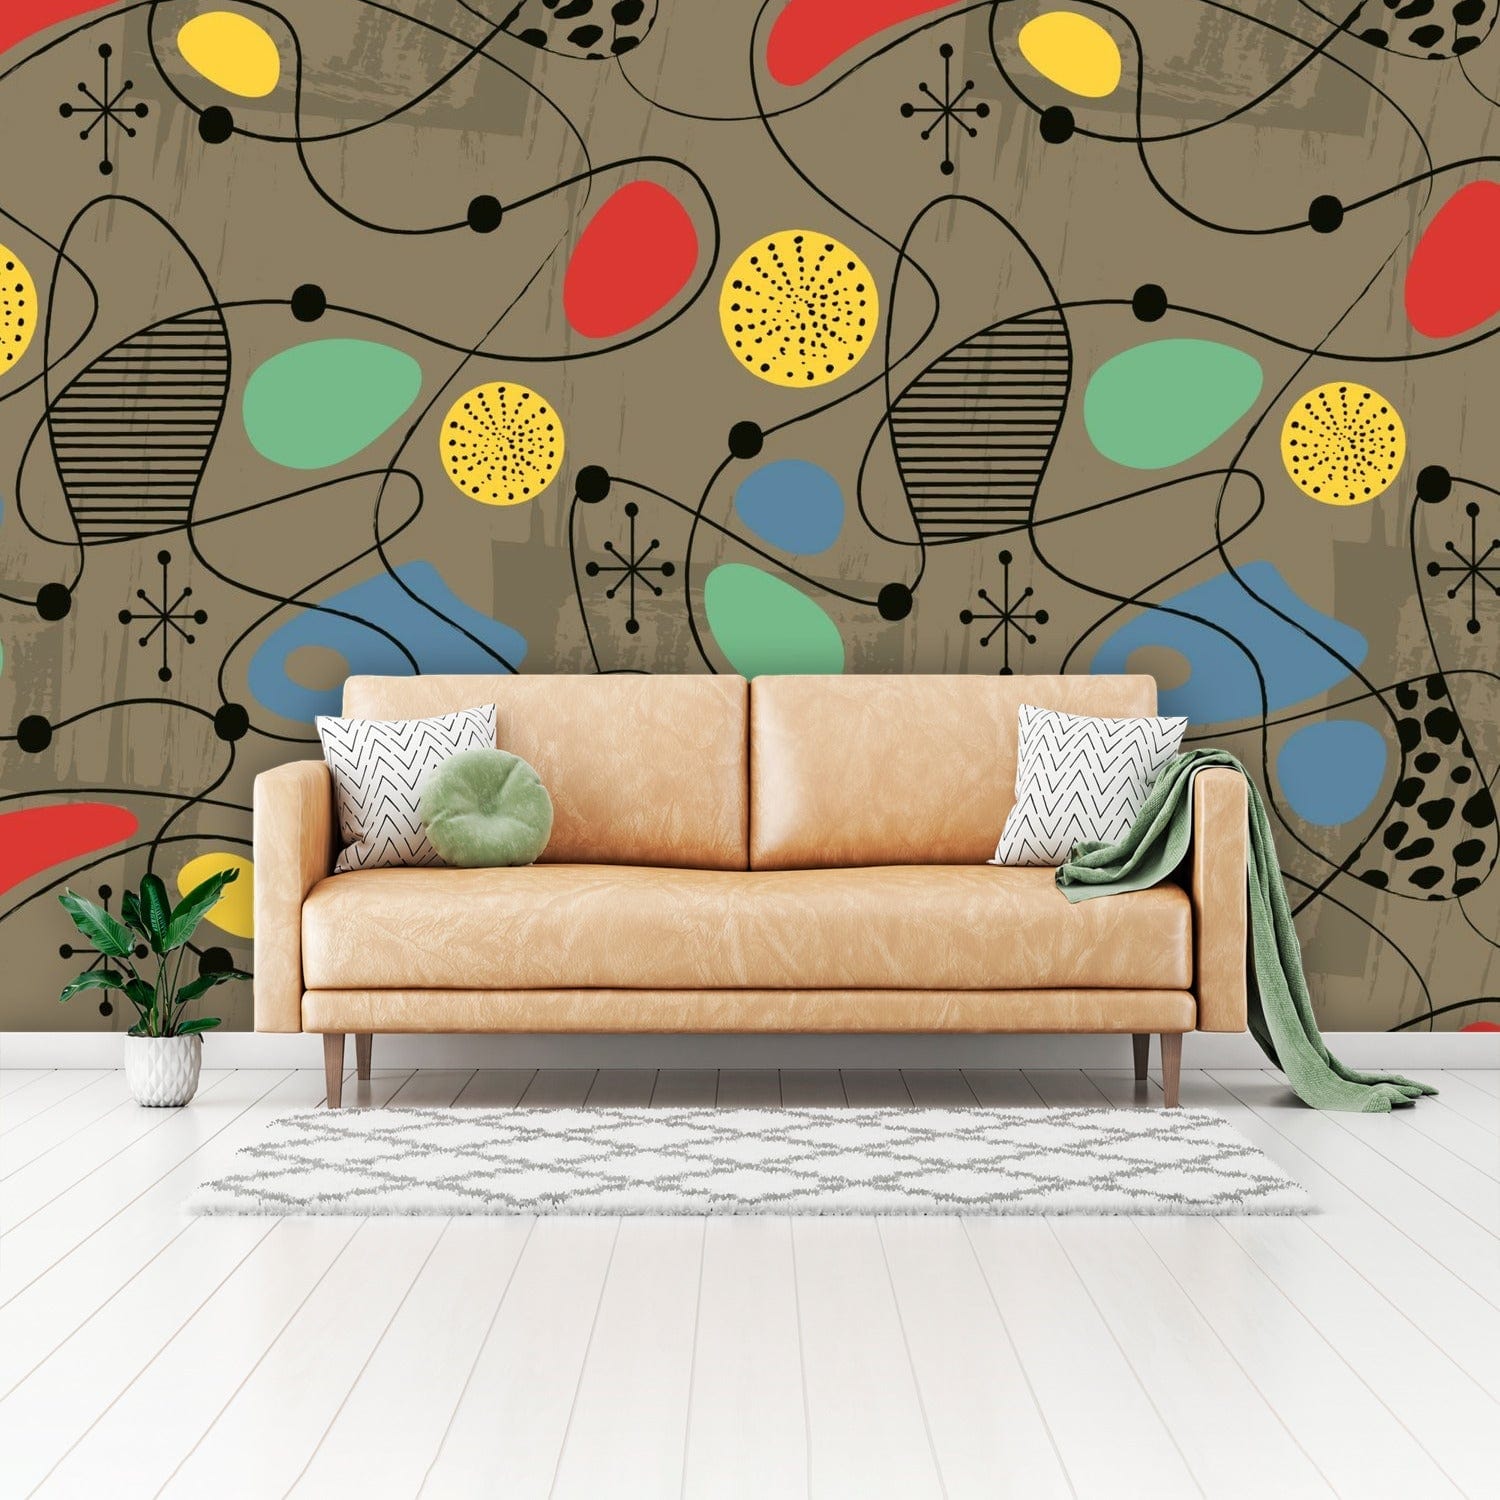 Mid Century Modern Wallpaper Sand Brown, Abstract Retro Atomic Starburst Peel And Stick Wall Murals Wallpaper H110 x W160